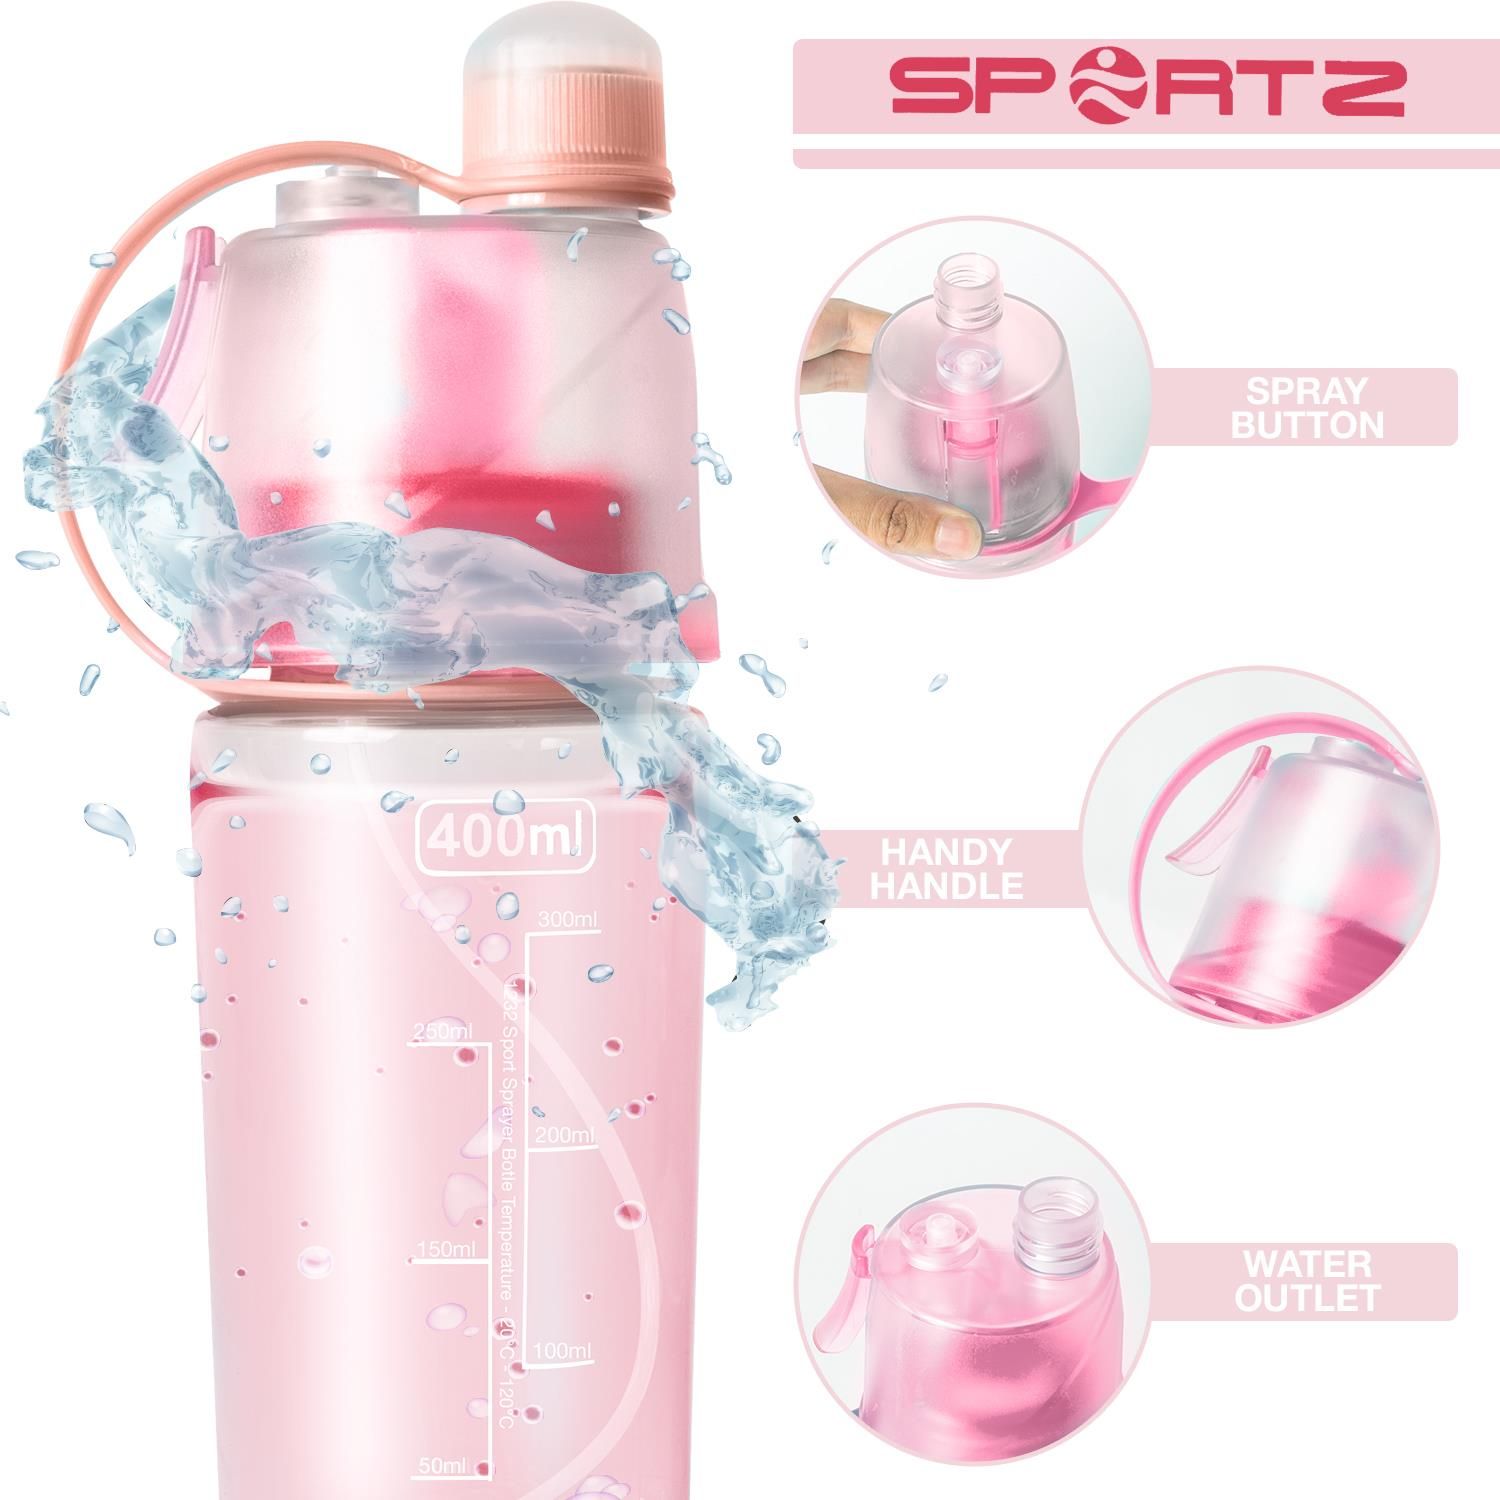 Travel Sports Water Bottle with Spray Function 400ml.  This spray water bottle has a button on the top of bottle to enable you to spray water.  Graduated design, there is scales on the bottle, so you can check your water capacity easily.  Leak proof design prevents the water leaking out. With portable handle and anti-lost lid, convenient to carry this sport water bottle to anywhere. Handle design is convenient for you to carry whether you are camping, hiking or traveling.  This creative water bottle can be useful in the car, train, office, school, sport or the gym. Water to quench your thirst, cooling spray, very suitable for students, office workers, sportsmen, outdoor people, groups, long-term driving.